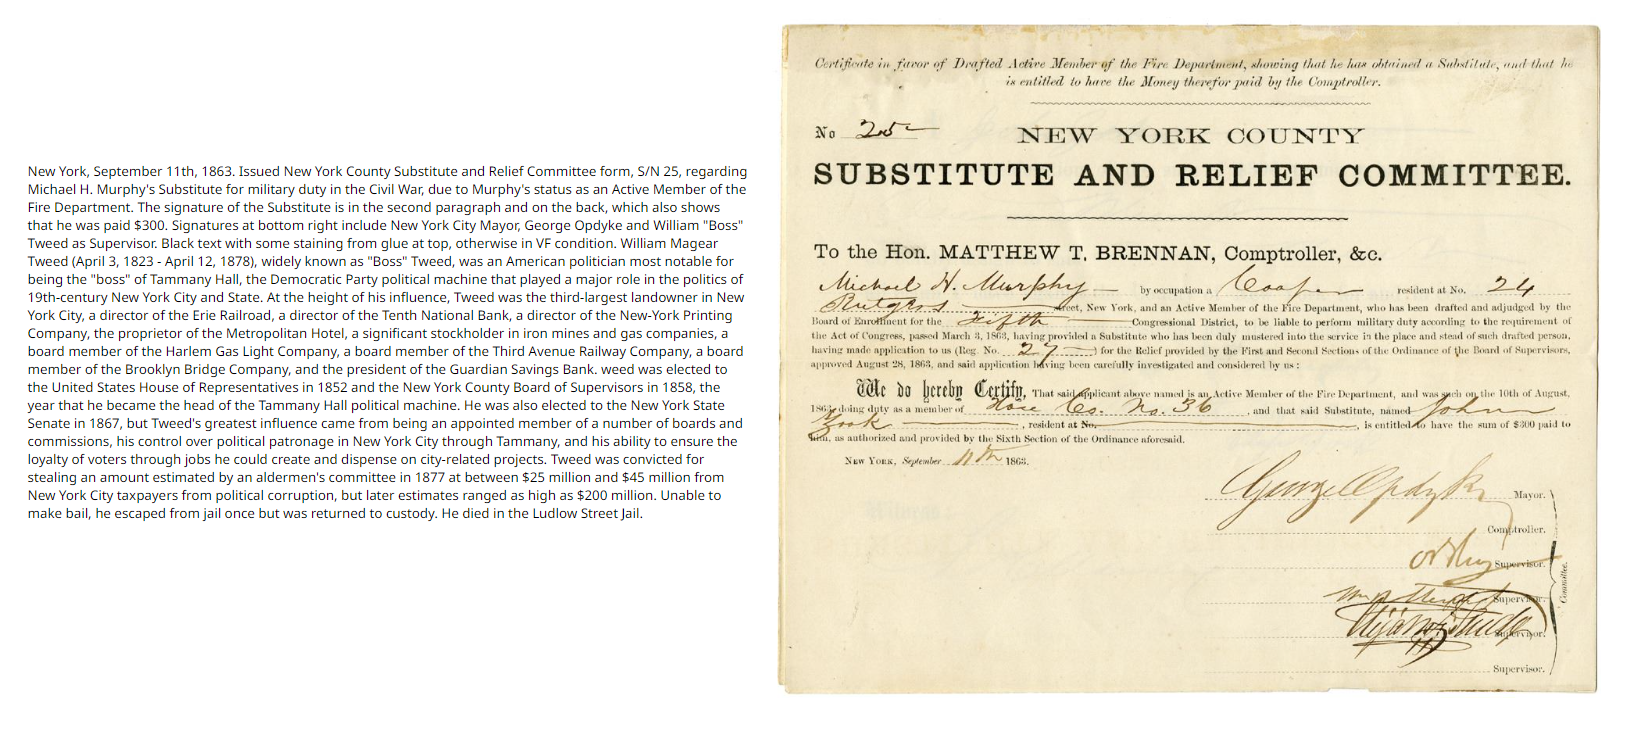 1863 New_York_County_Substitute_and_Relief_Committee_Civil_War_Substitute_Docum